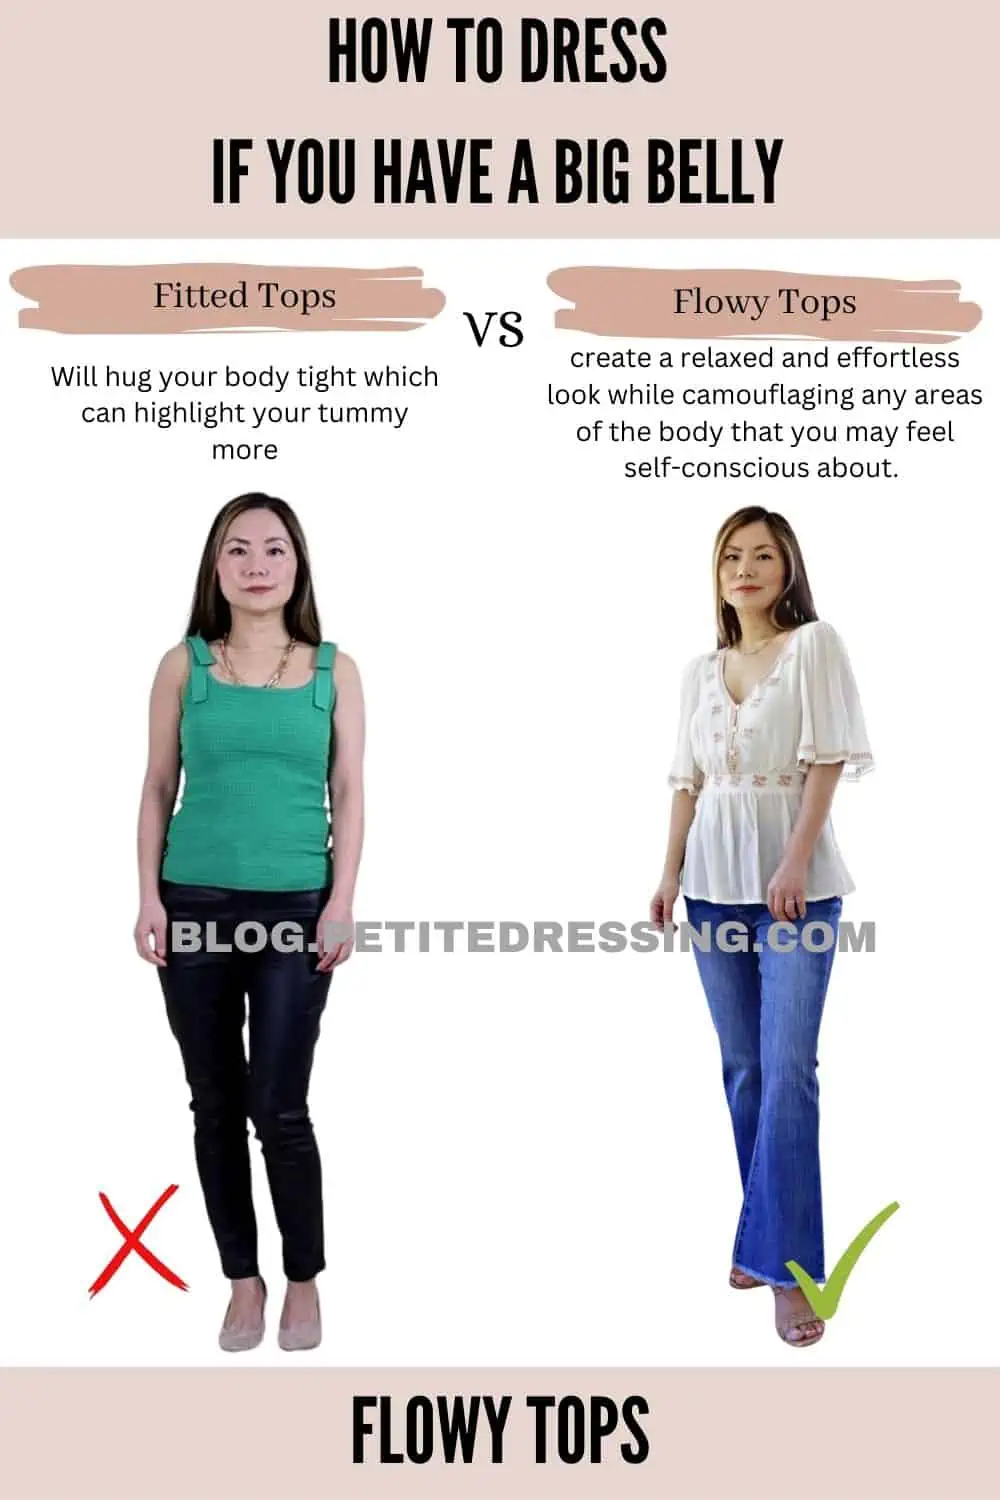 Comprehensive Styling Guide if you have a Belly - Petite Dressing